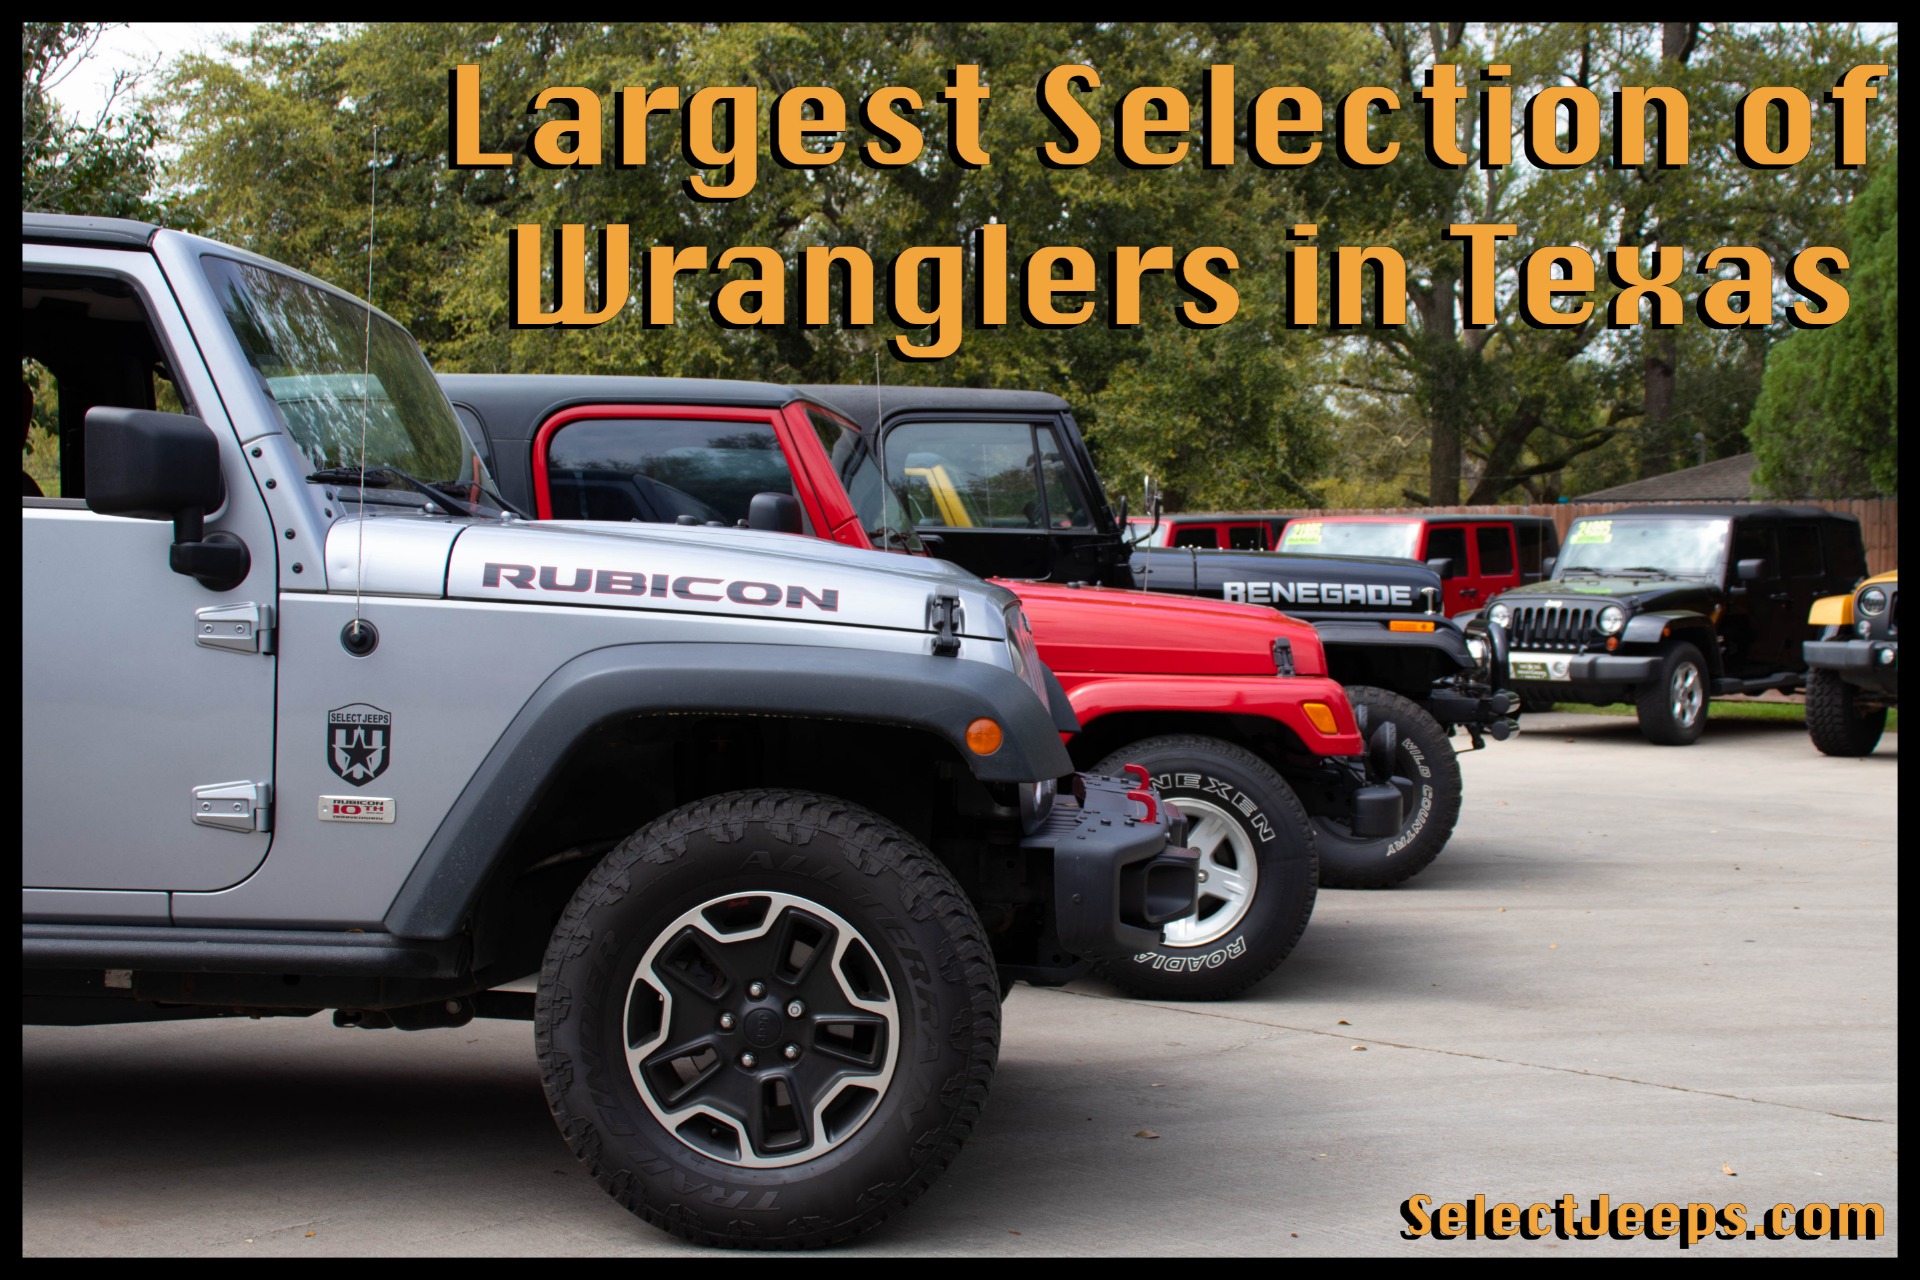 Used 2005 Jeep Wrangler Unlimited Rubicon For Sale ($25,995) | Select Jeeps  Inc. Stock #327951